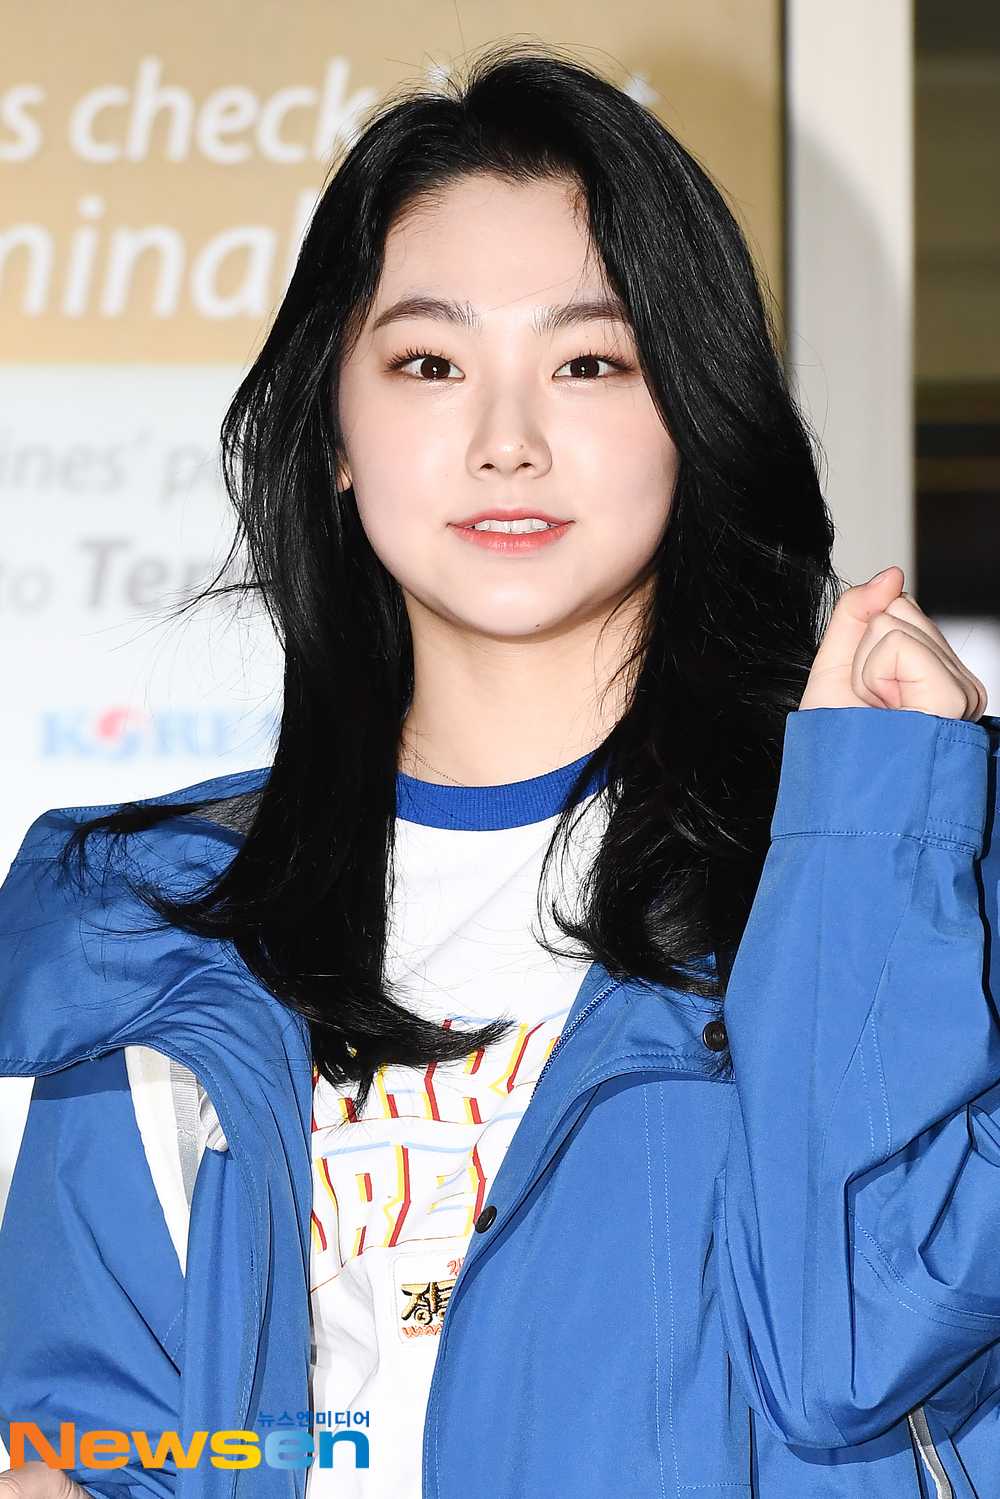 Actors Park Ho-san, Park Jung-chul, Hyun-woo, Eom Hyun-kyung, mixed martial arts player Jung Chan-sung, former Wanna One member Park Woo-jin and Gugudan member Mina left for Thailand Bangkok, a filming car for SBS Jungles Law in Lost & Island, on March 25 at the Incheon International Airport in Unseo-dong, Jung-gu, Incheon.Gugudan member Mina is leaving for Thailand Bangkok.exponential earthquake